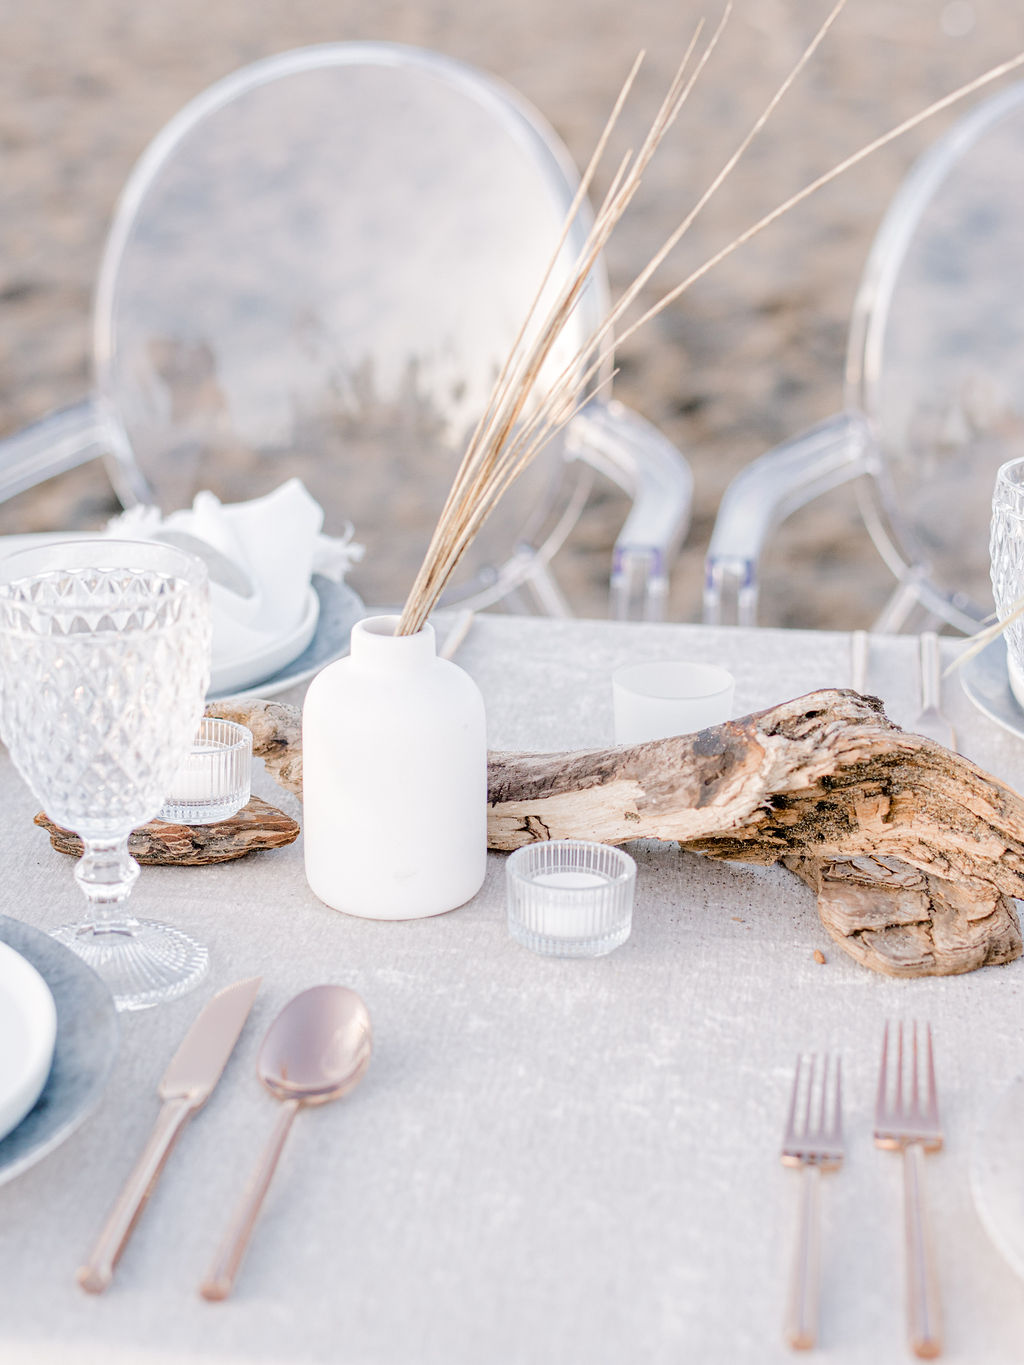 Romantic alfresco dinner along the beach for an intimate Vancouver wedding, spring and summer wedding inspiration in Canada, modern wedding tablescape design with velvet linens and ghost chair seating, 